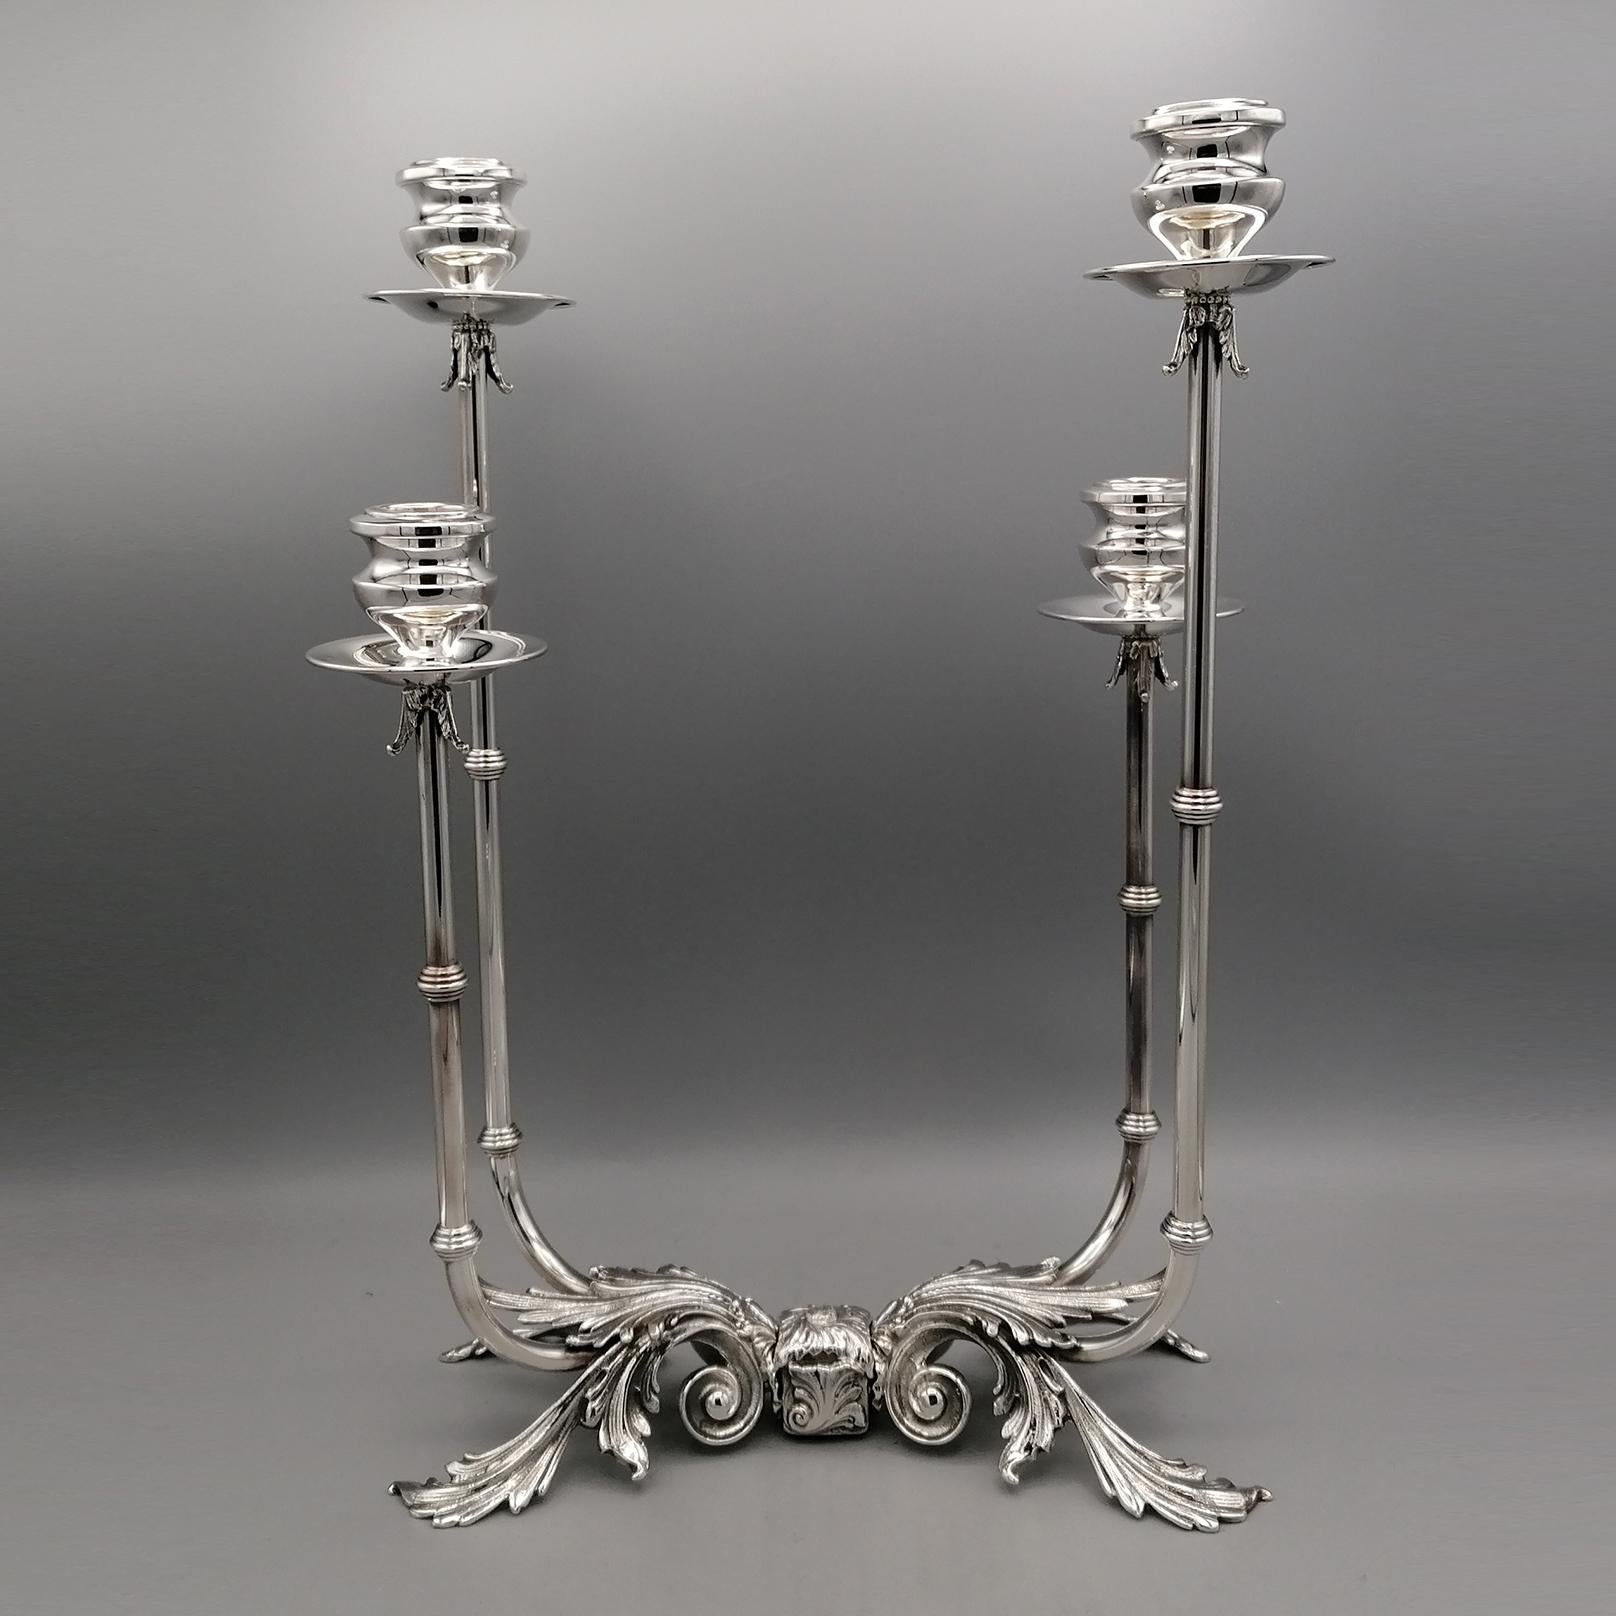 21th Century Italian Sterling Silver 4 Lights Candelabra
4 flame sterling silver candelabra.
The base was made with the ella fusion technique and modeled with acanthus leaves. Subsequently finished with chiselling.
The four candle holder stems,